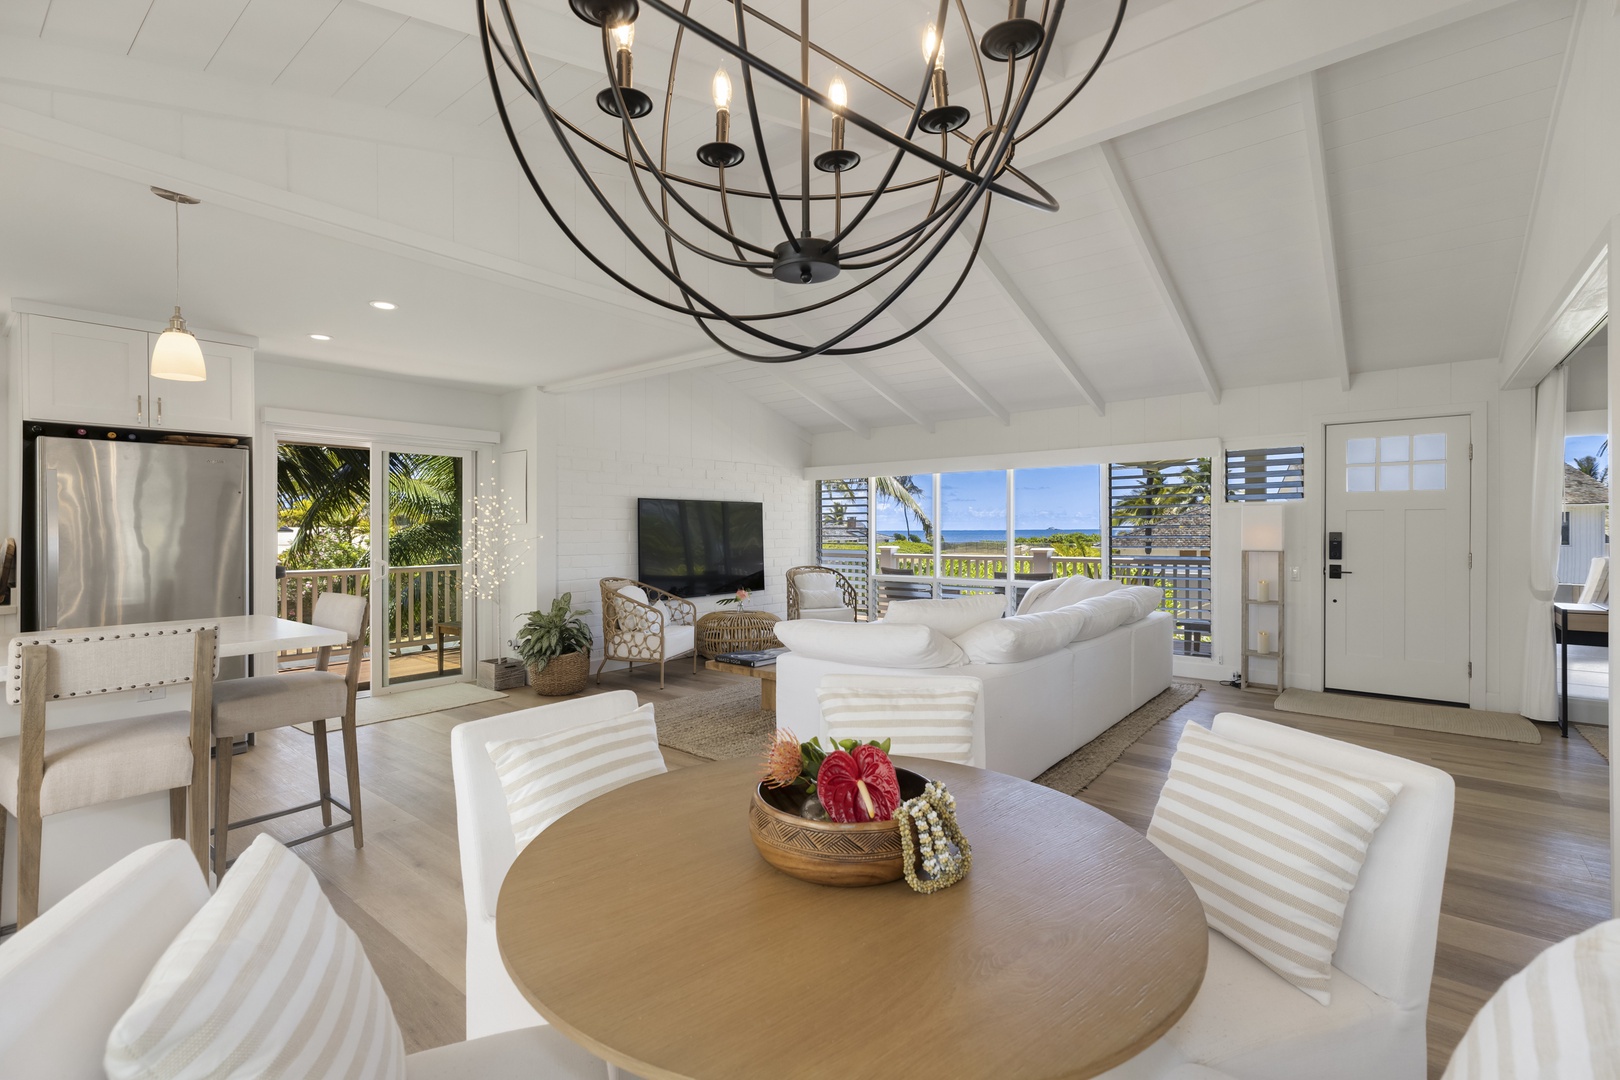 Kailua Vacation Rentals, Seahorse Beach House - Luxury and spaciousness greet you in our living area where an open floor plan invites relaxation and connection.